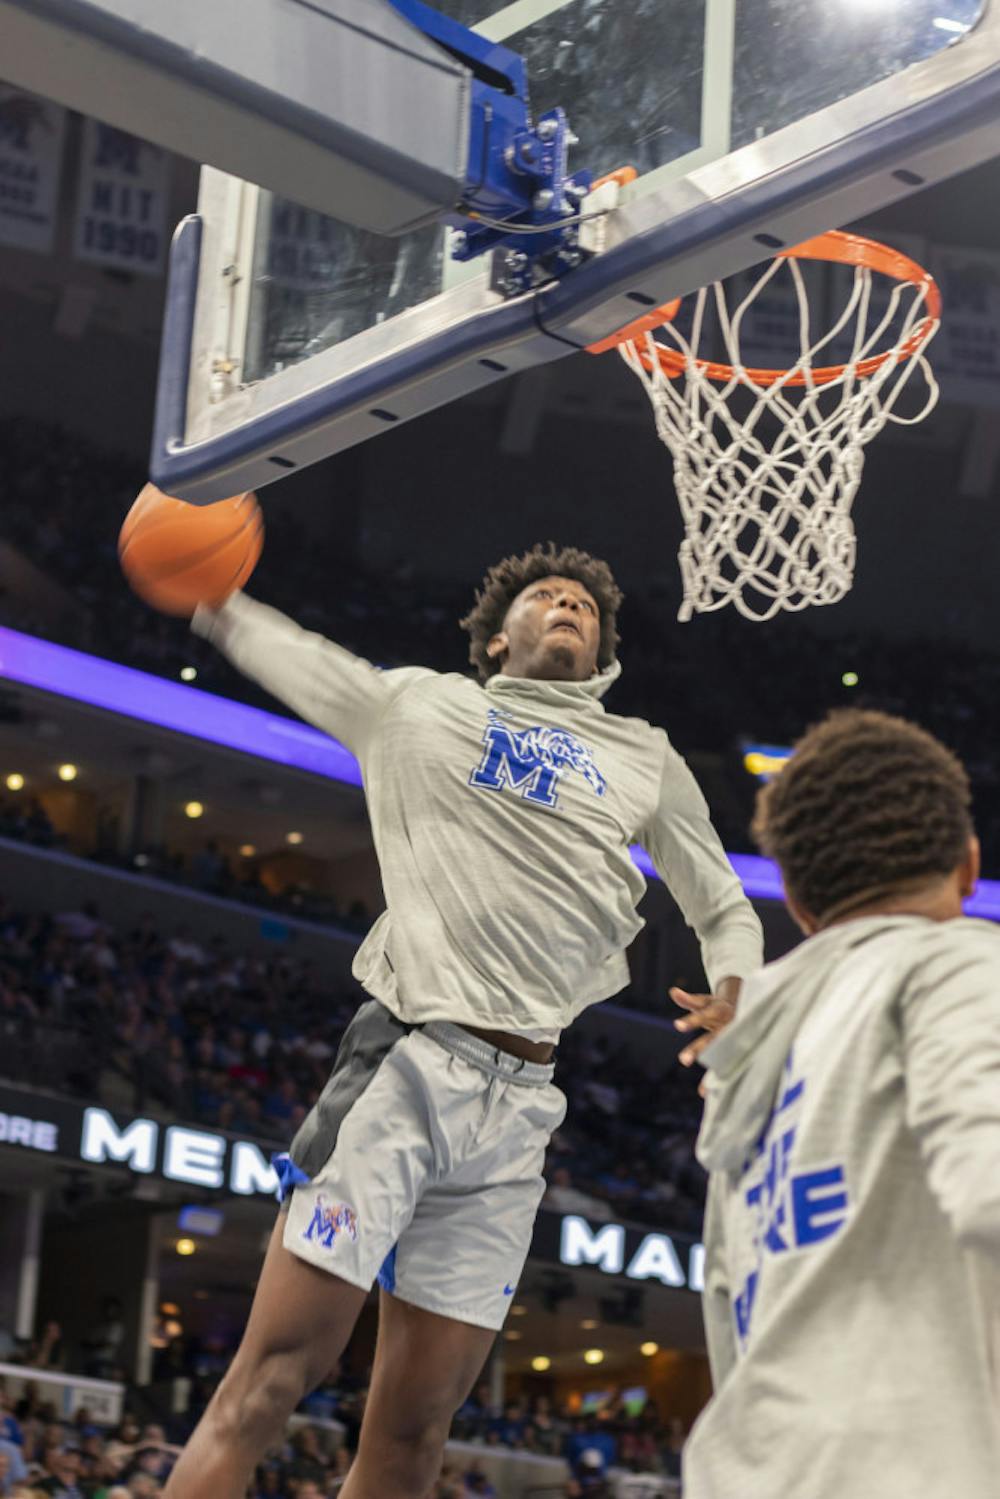 <p>James Wiseman going for a dunk. The freshman had 28 points and 11 rebounds in his debut in a 97-64 win over South Carolina State.&nbsp;</p>